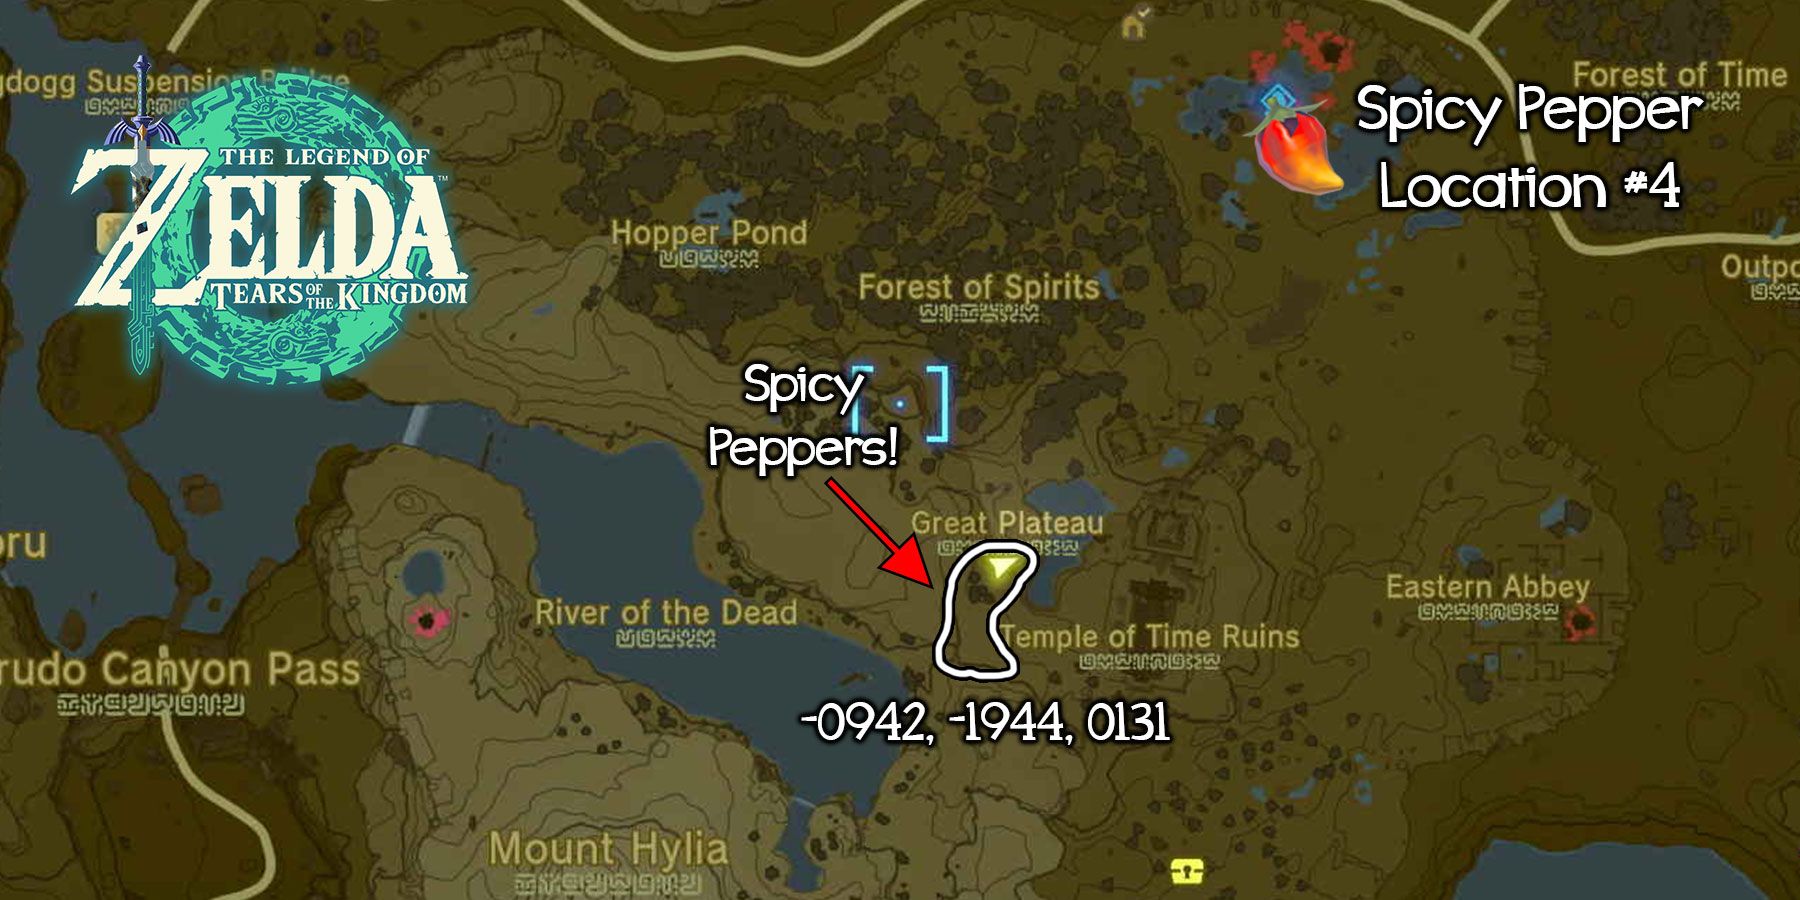 Spicy Peppers farming location in Zelda: Tears of the Kingdom.